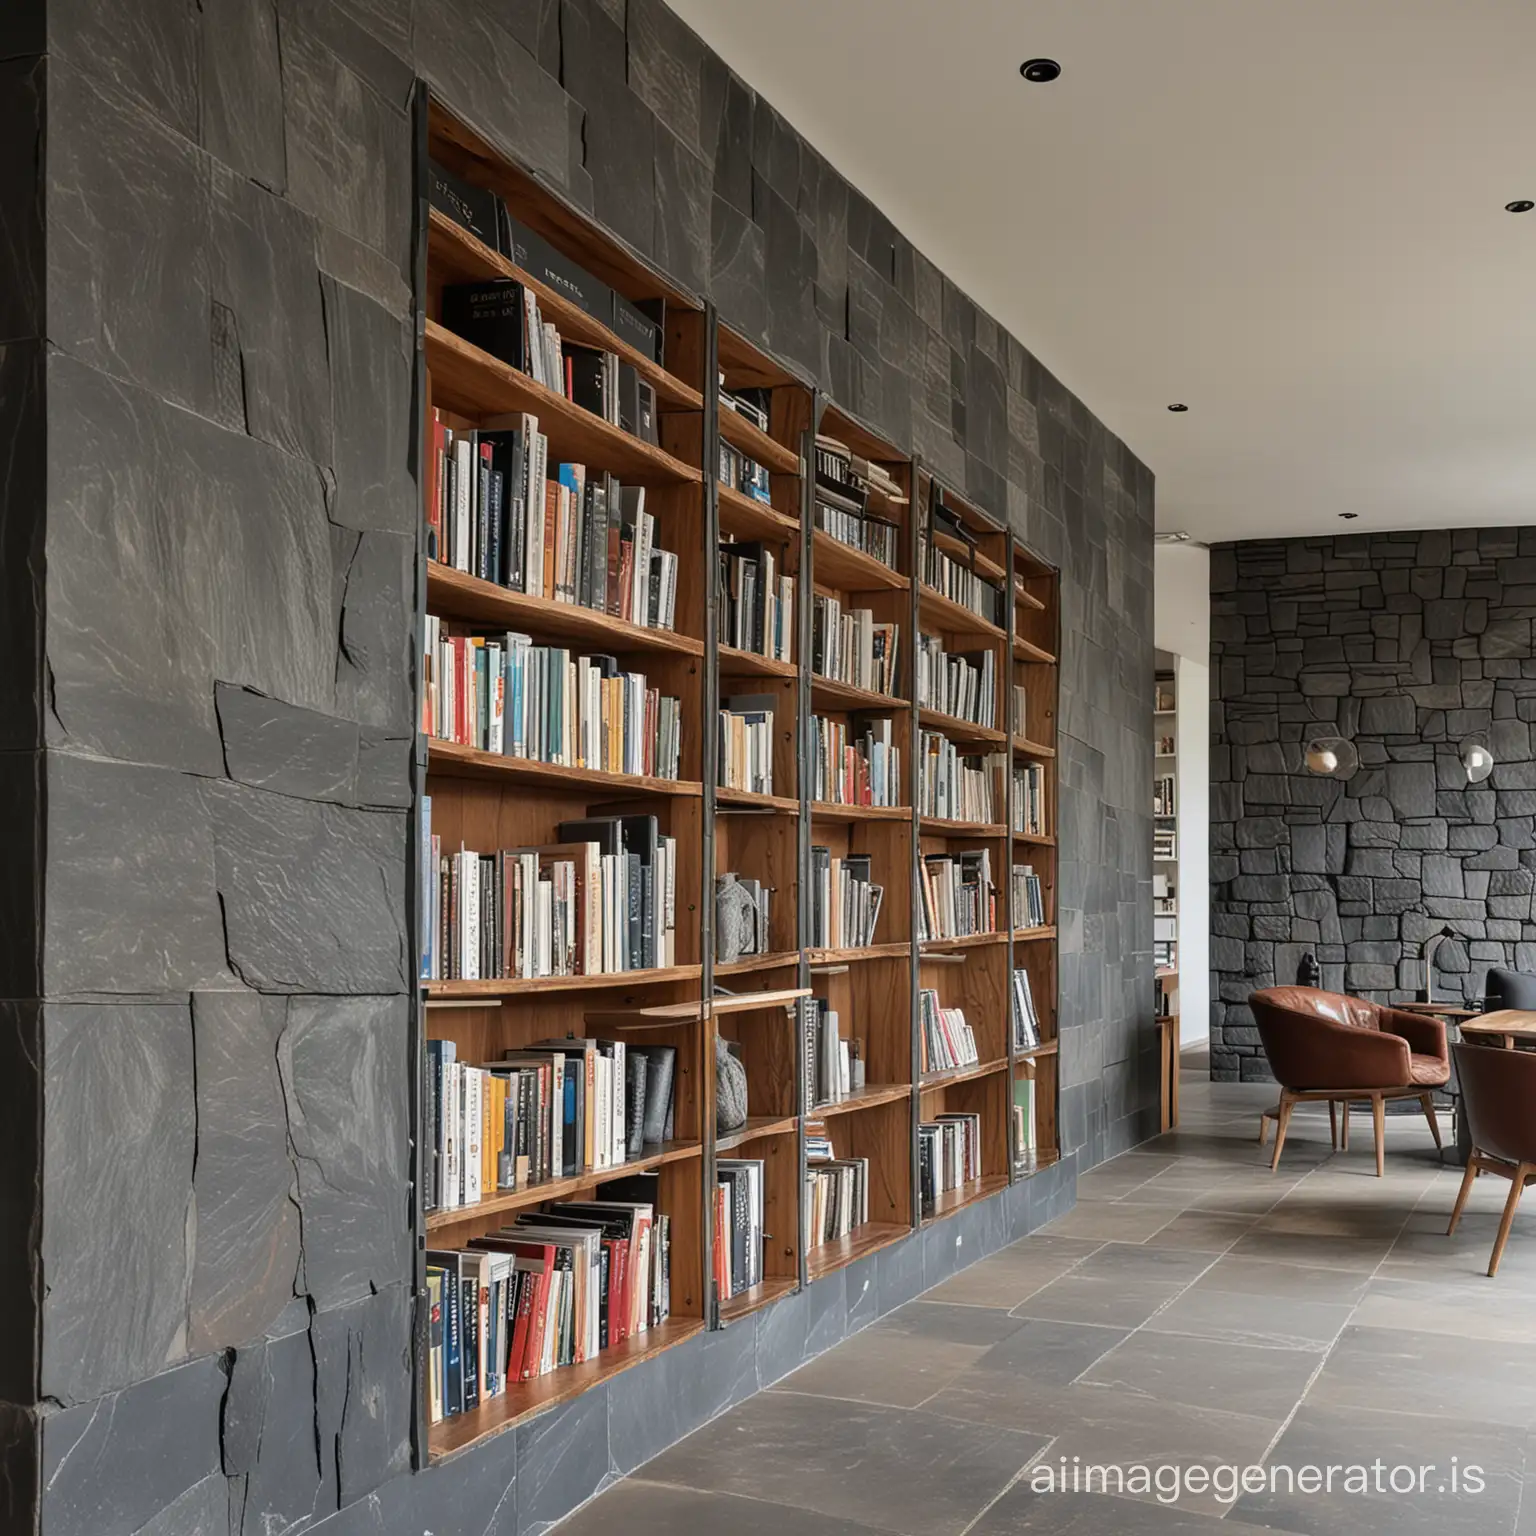 Long wooden library bookcase cover a basalt stone wall